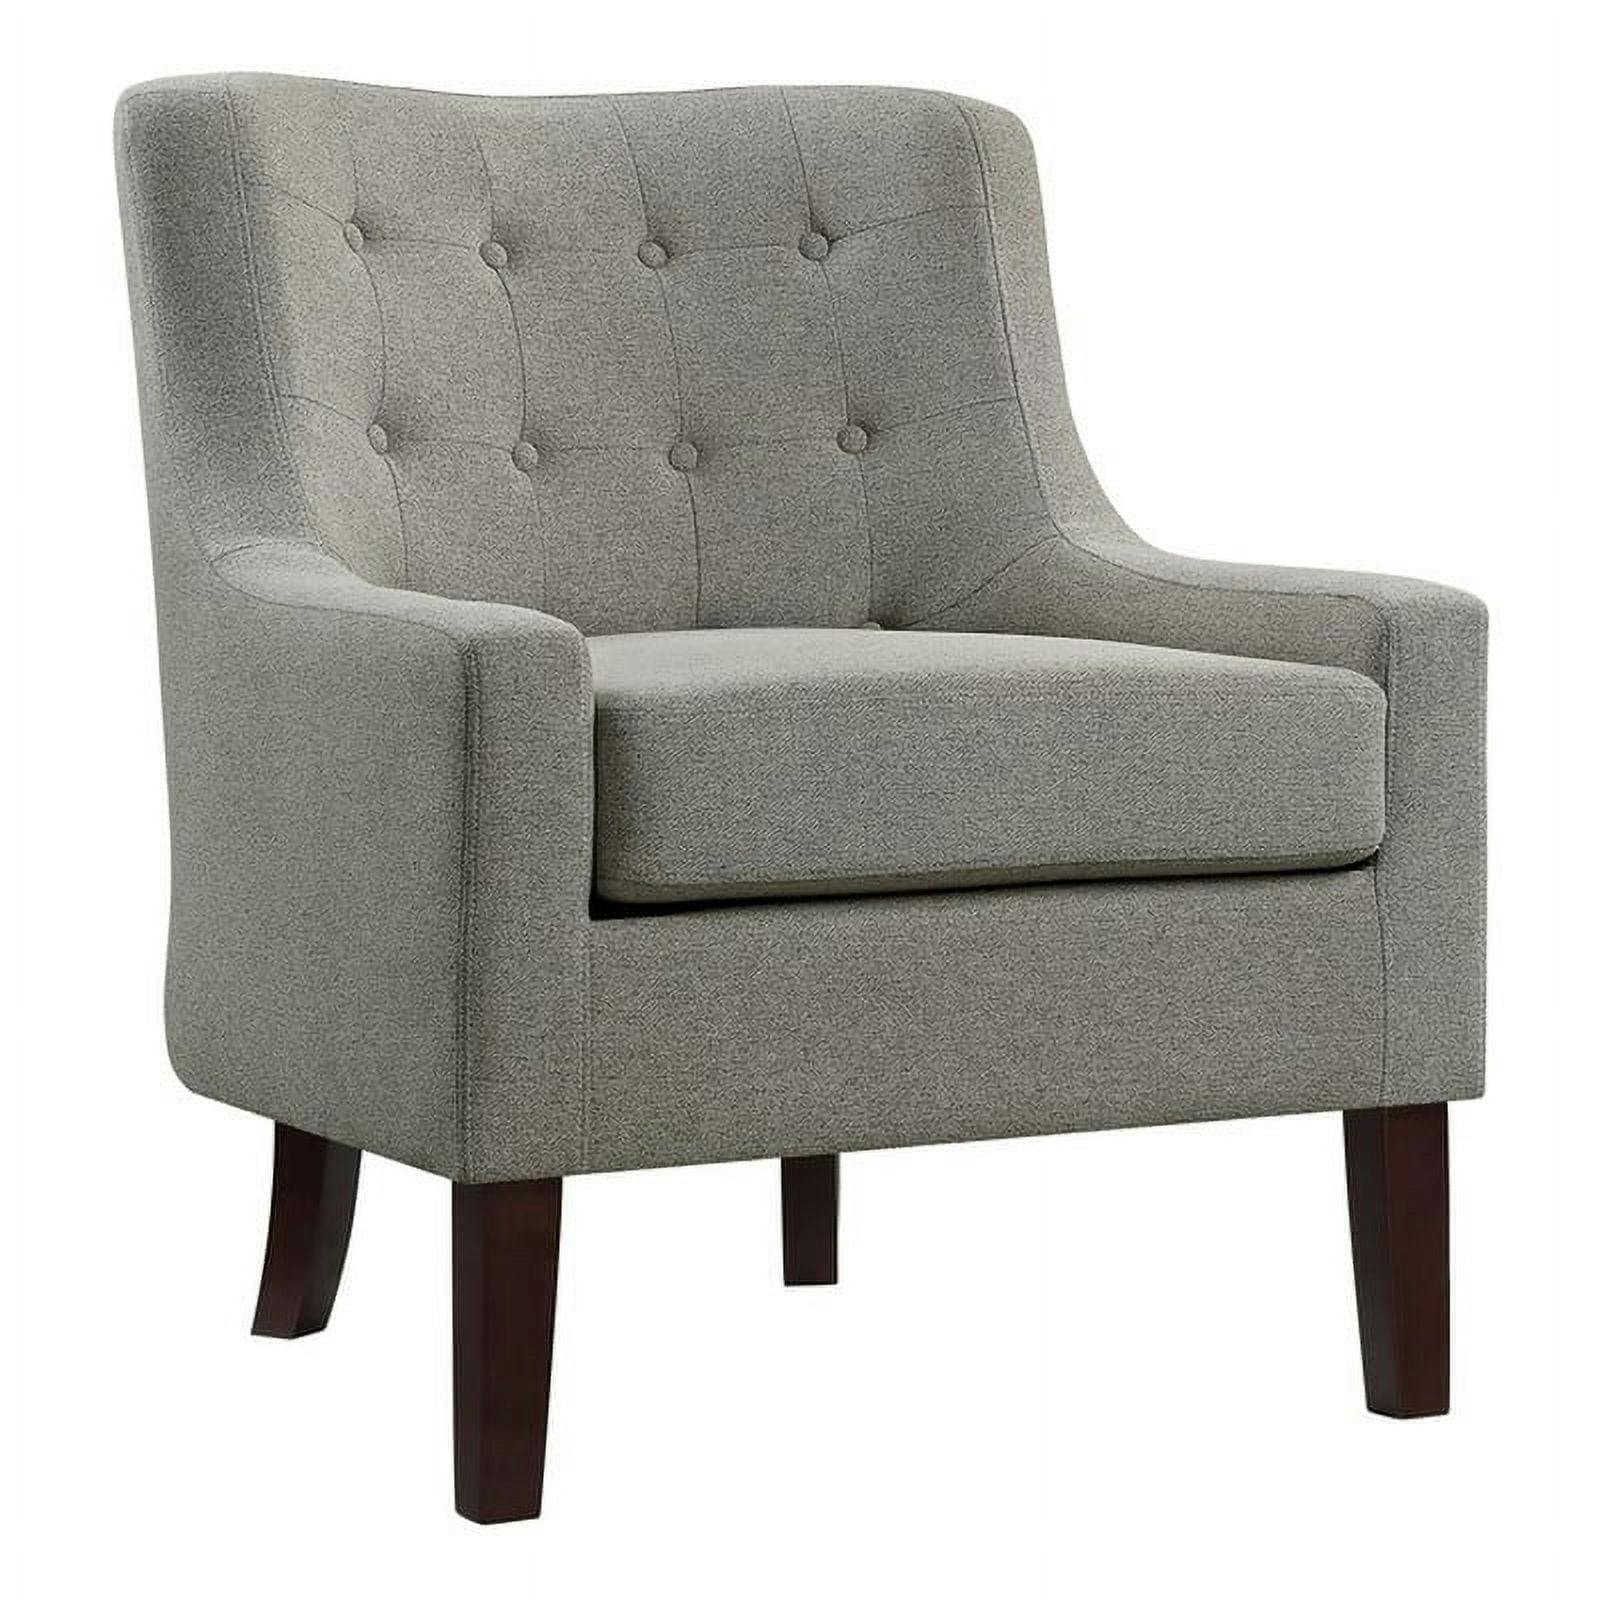 Cairn Brown Textured Fabric Slope Arm Accent Chair